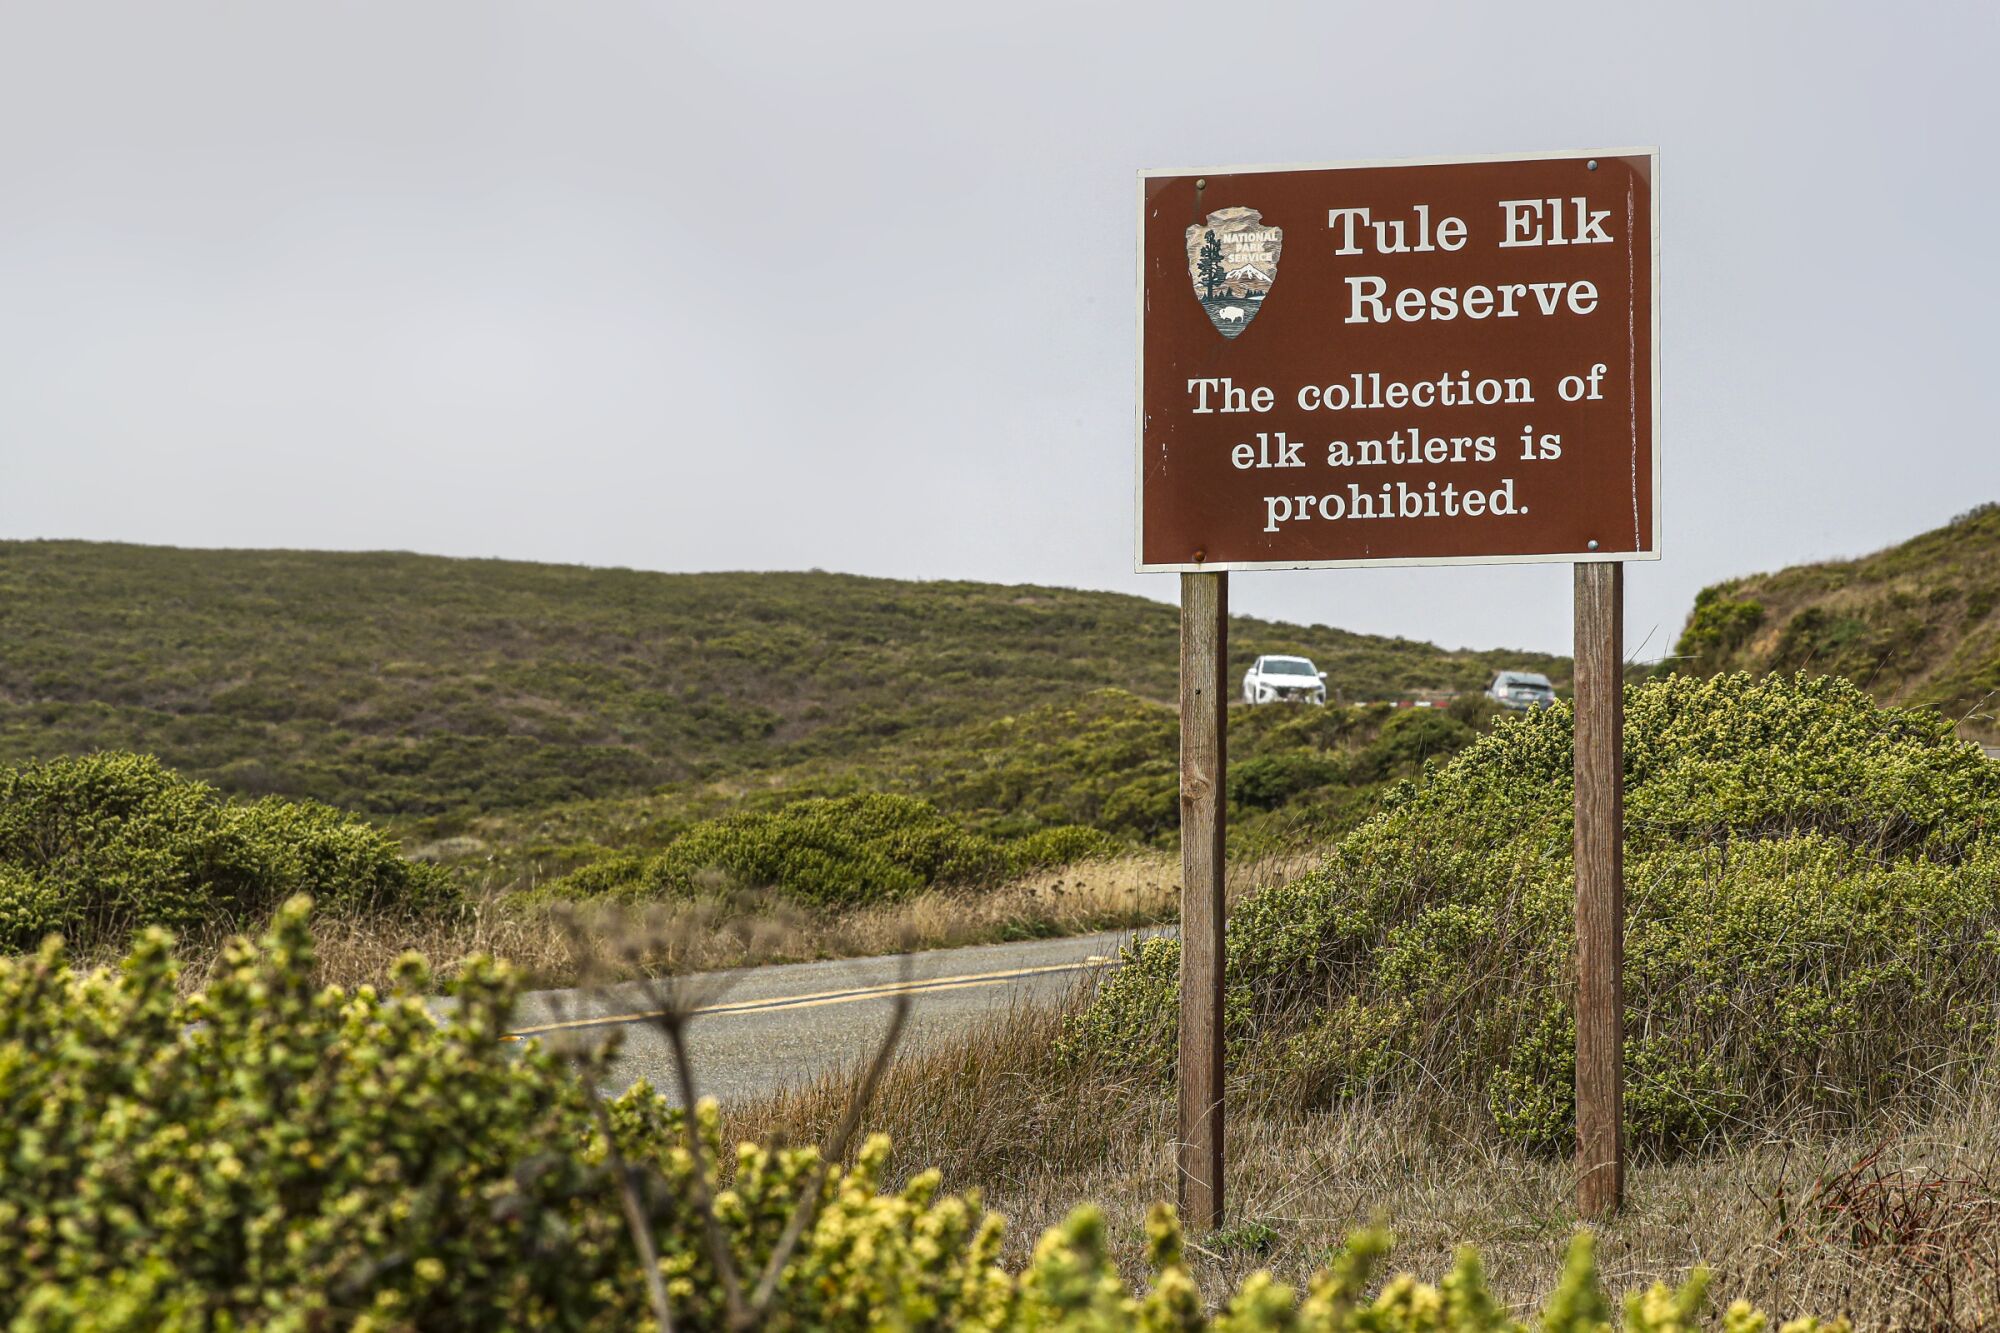 The Tule Elk Reserve is fenced around to keep elk from grazing on ranch land